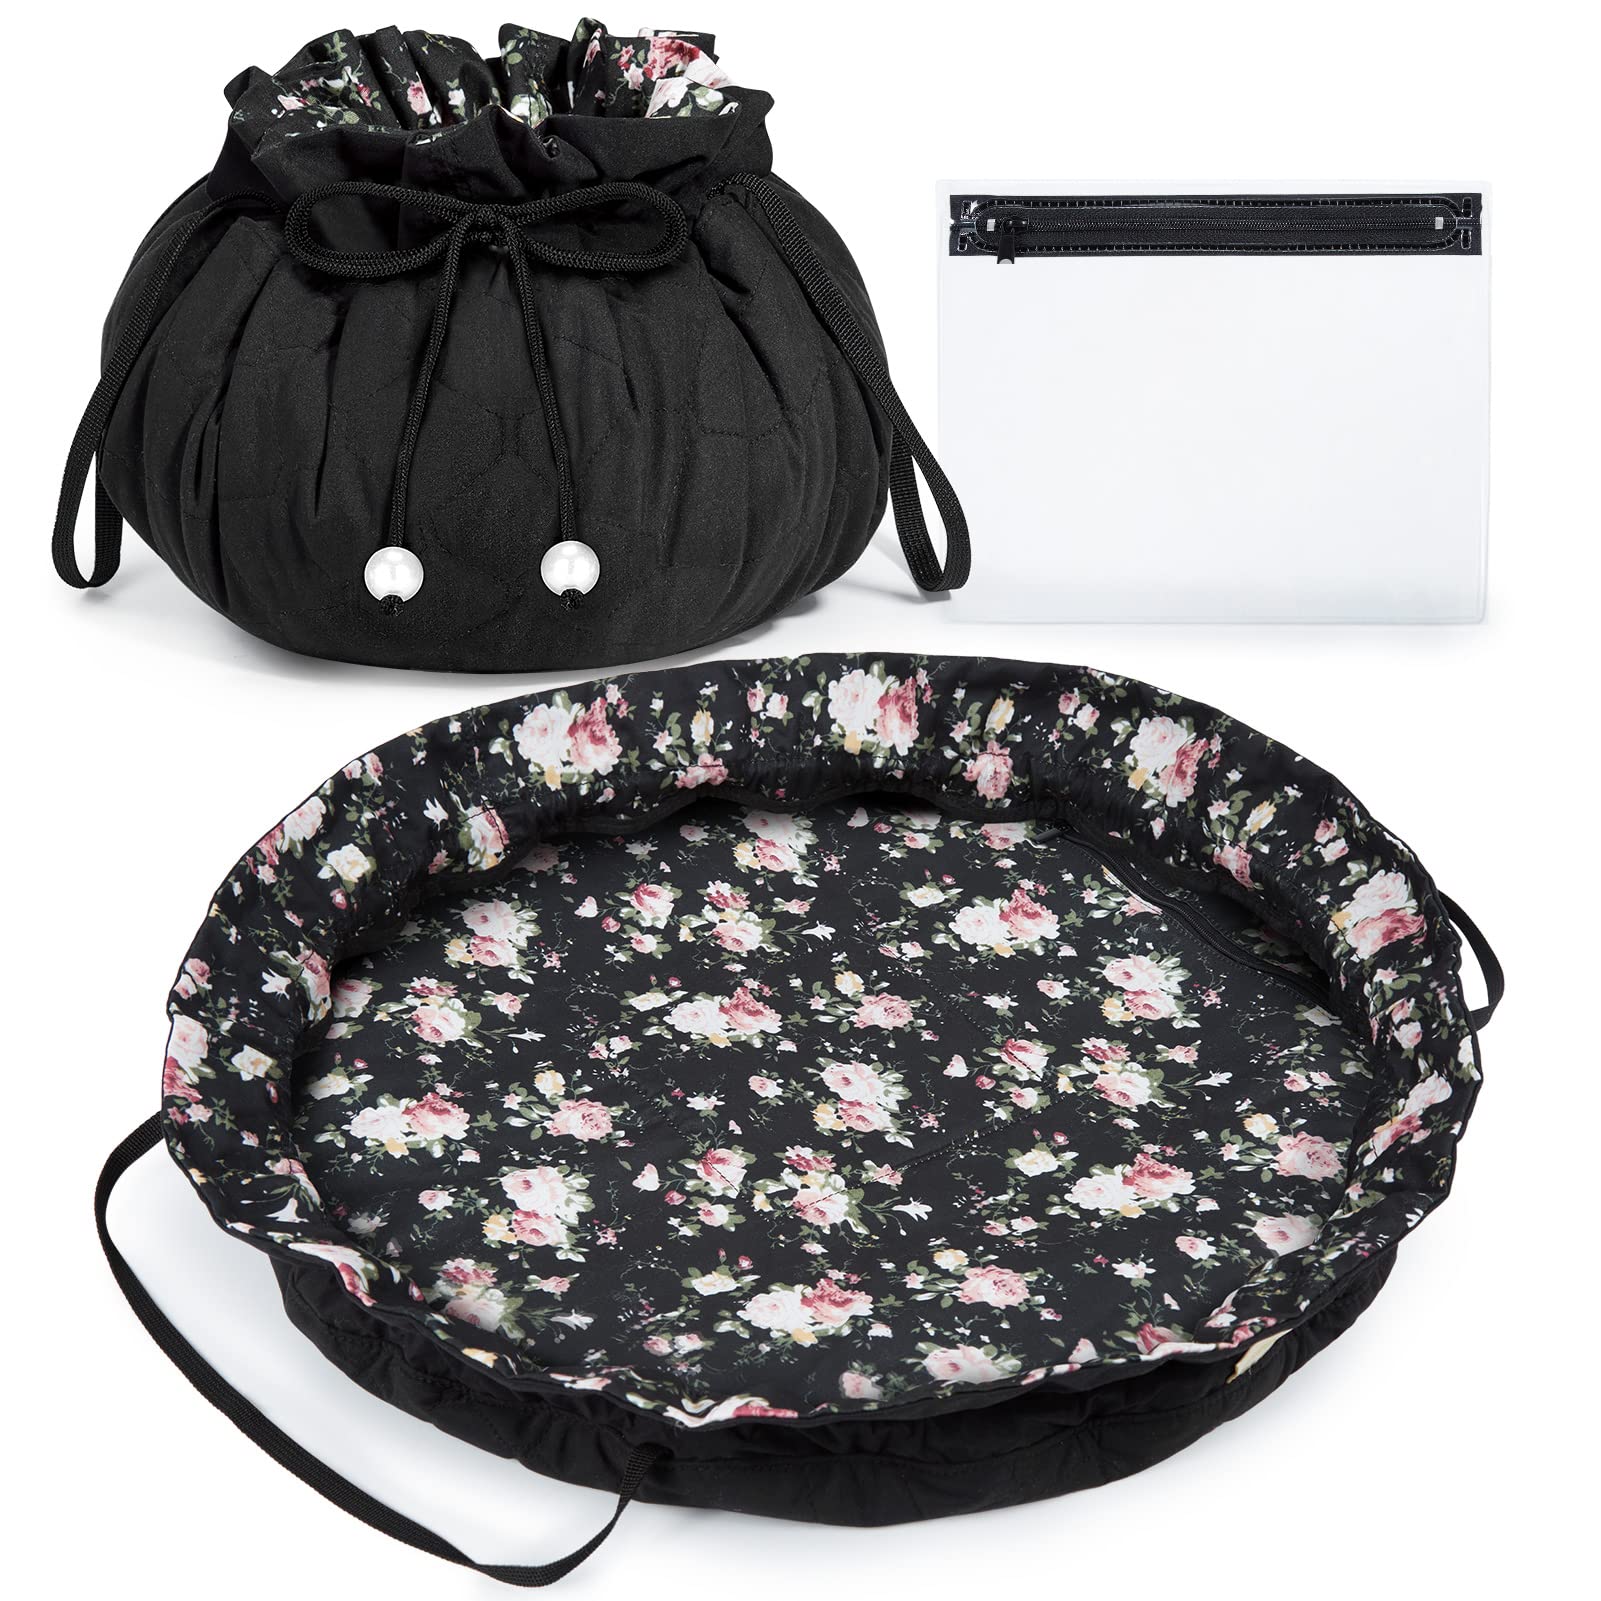 BAGSMART Drawstring Makeup Bag, Cosmetic Bag, Travel Makeup Organizer Case with Clear Pouch Set, Make Up Bags for Women Portable Toiletries Accessories Brush Floral (Black)